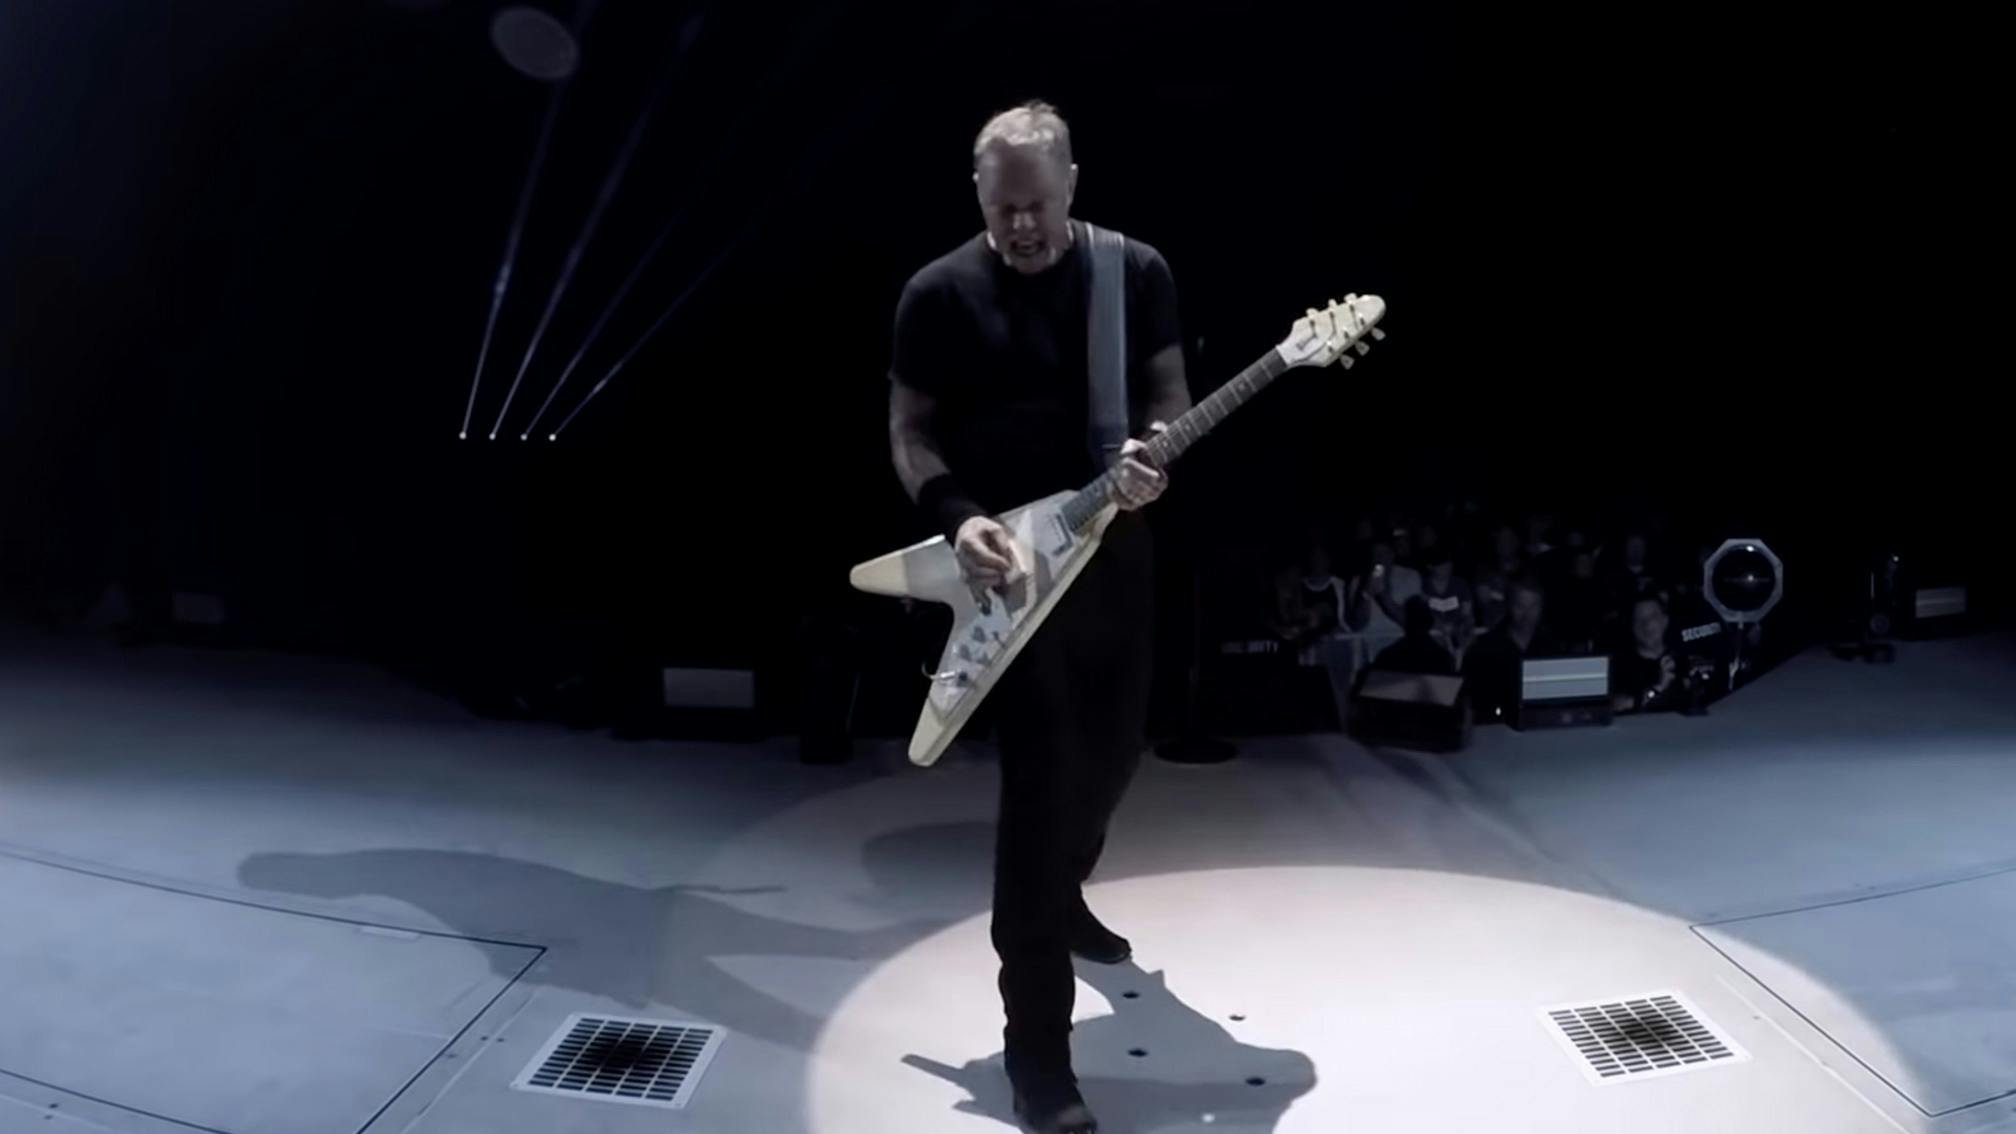 Watch Metallica's full 2018 gig from Lincoln, Nebraska for one-off streaming event